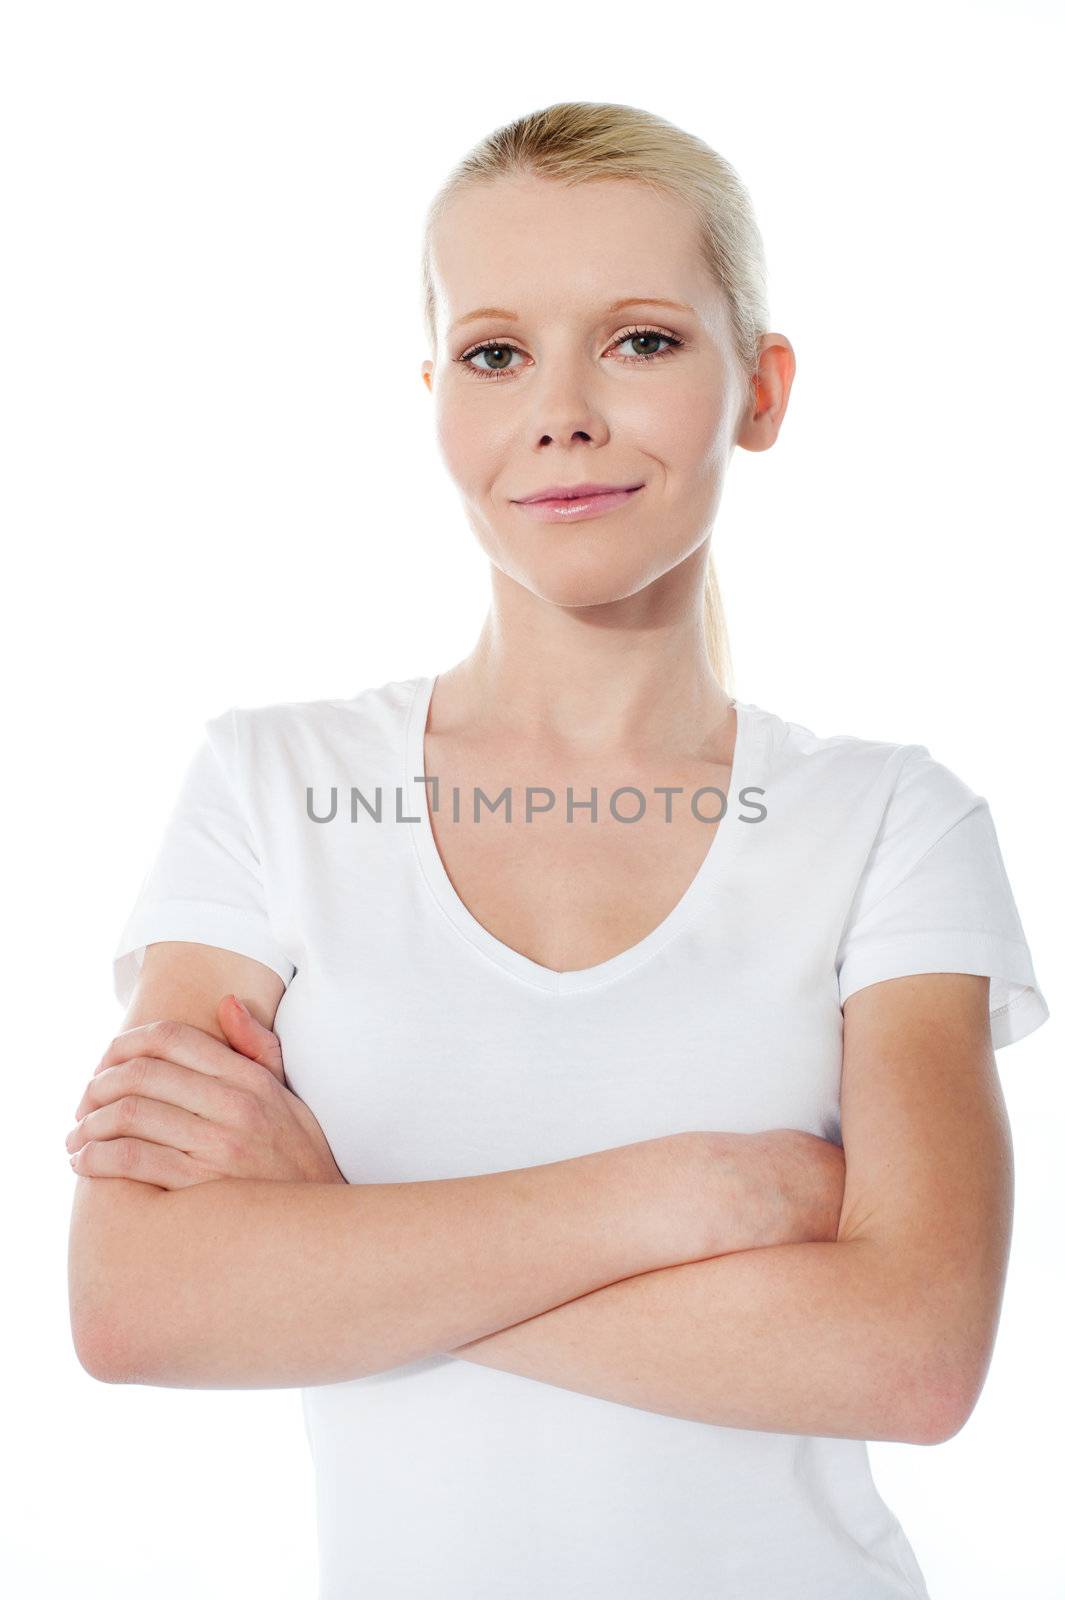 Smiling teenager with folded arms posing on white background